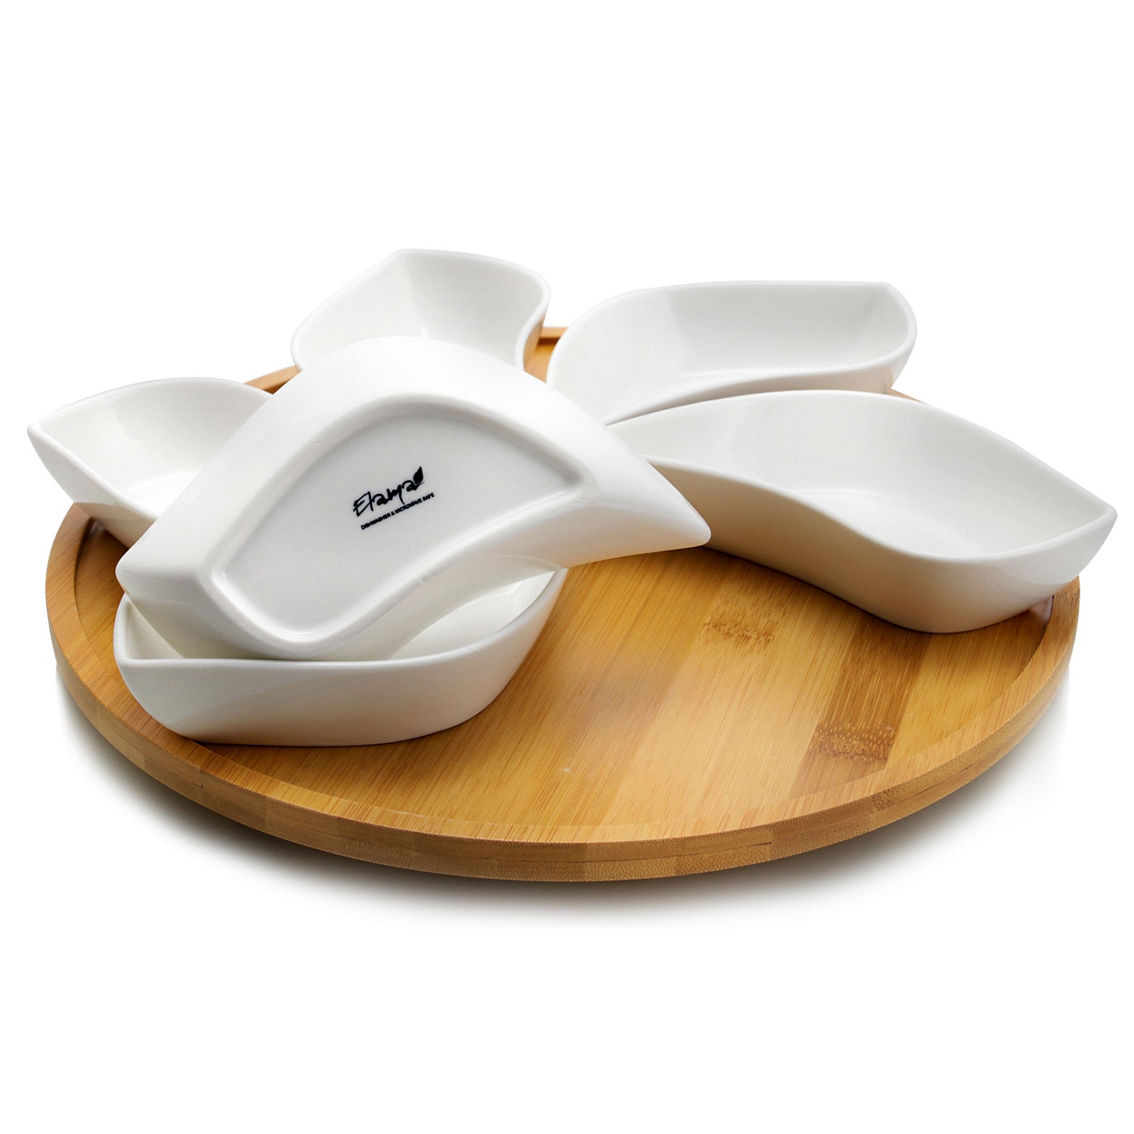 Elama Signature Modern 13.5 Inch 7pc Lazy Susan Appetizer and Condiment Server S - Image 2 of 5